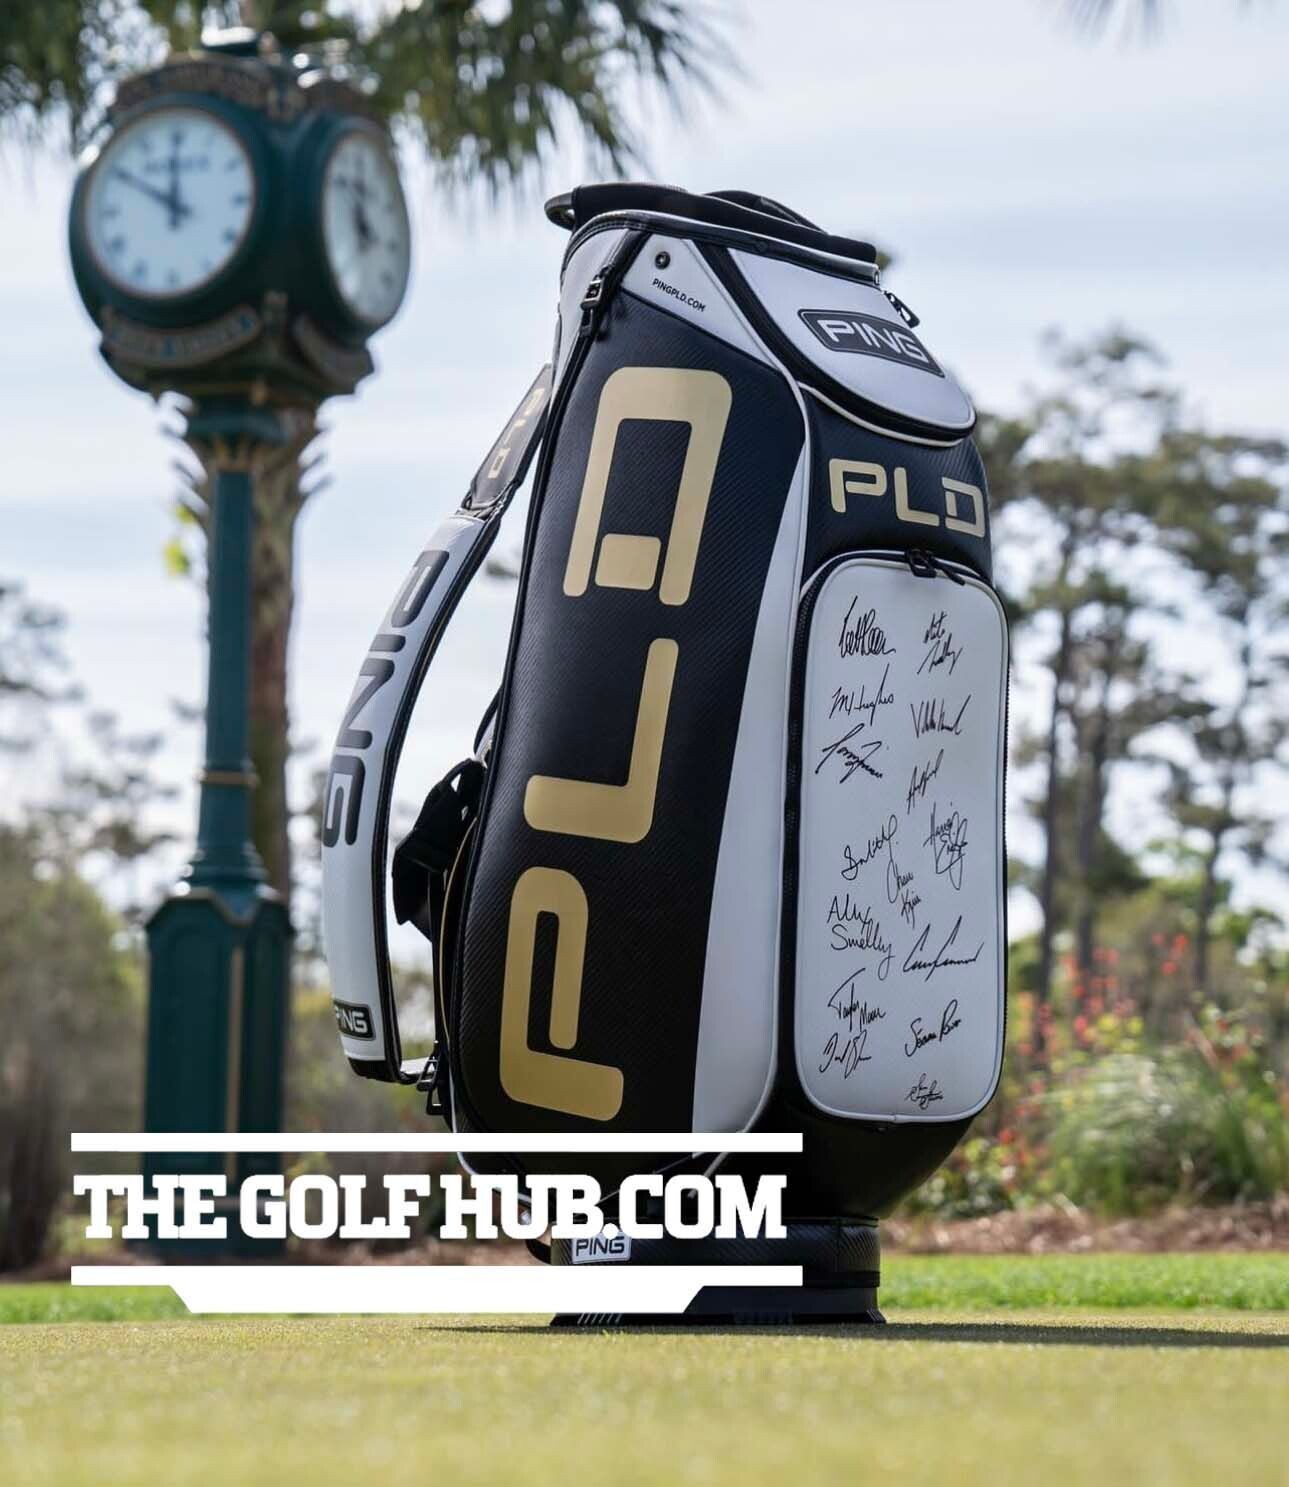 *NEW* Ping PLD *RARE* 1/1 Autographed Tour Only Staff Bag (Authenticated Photo) 🏆✨